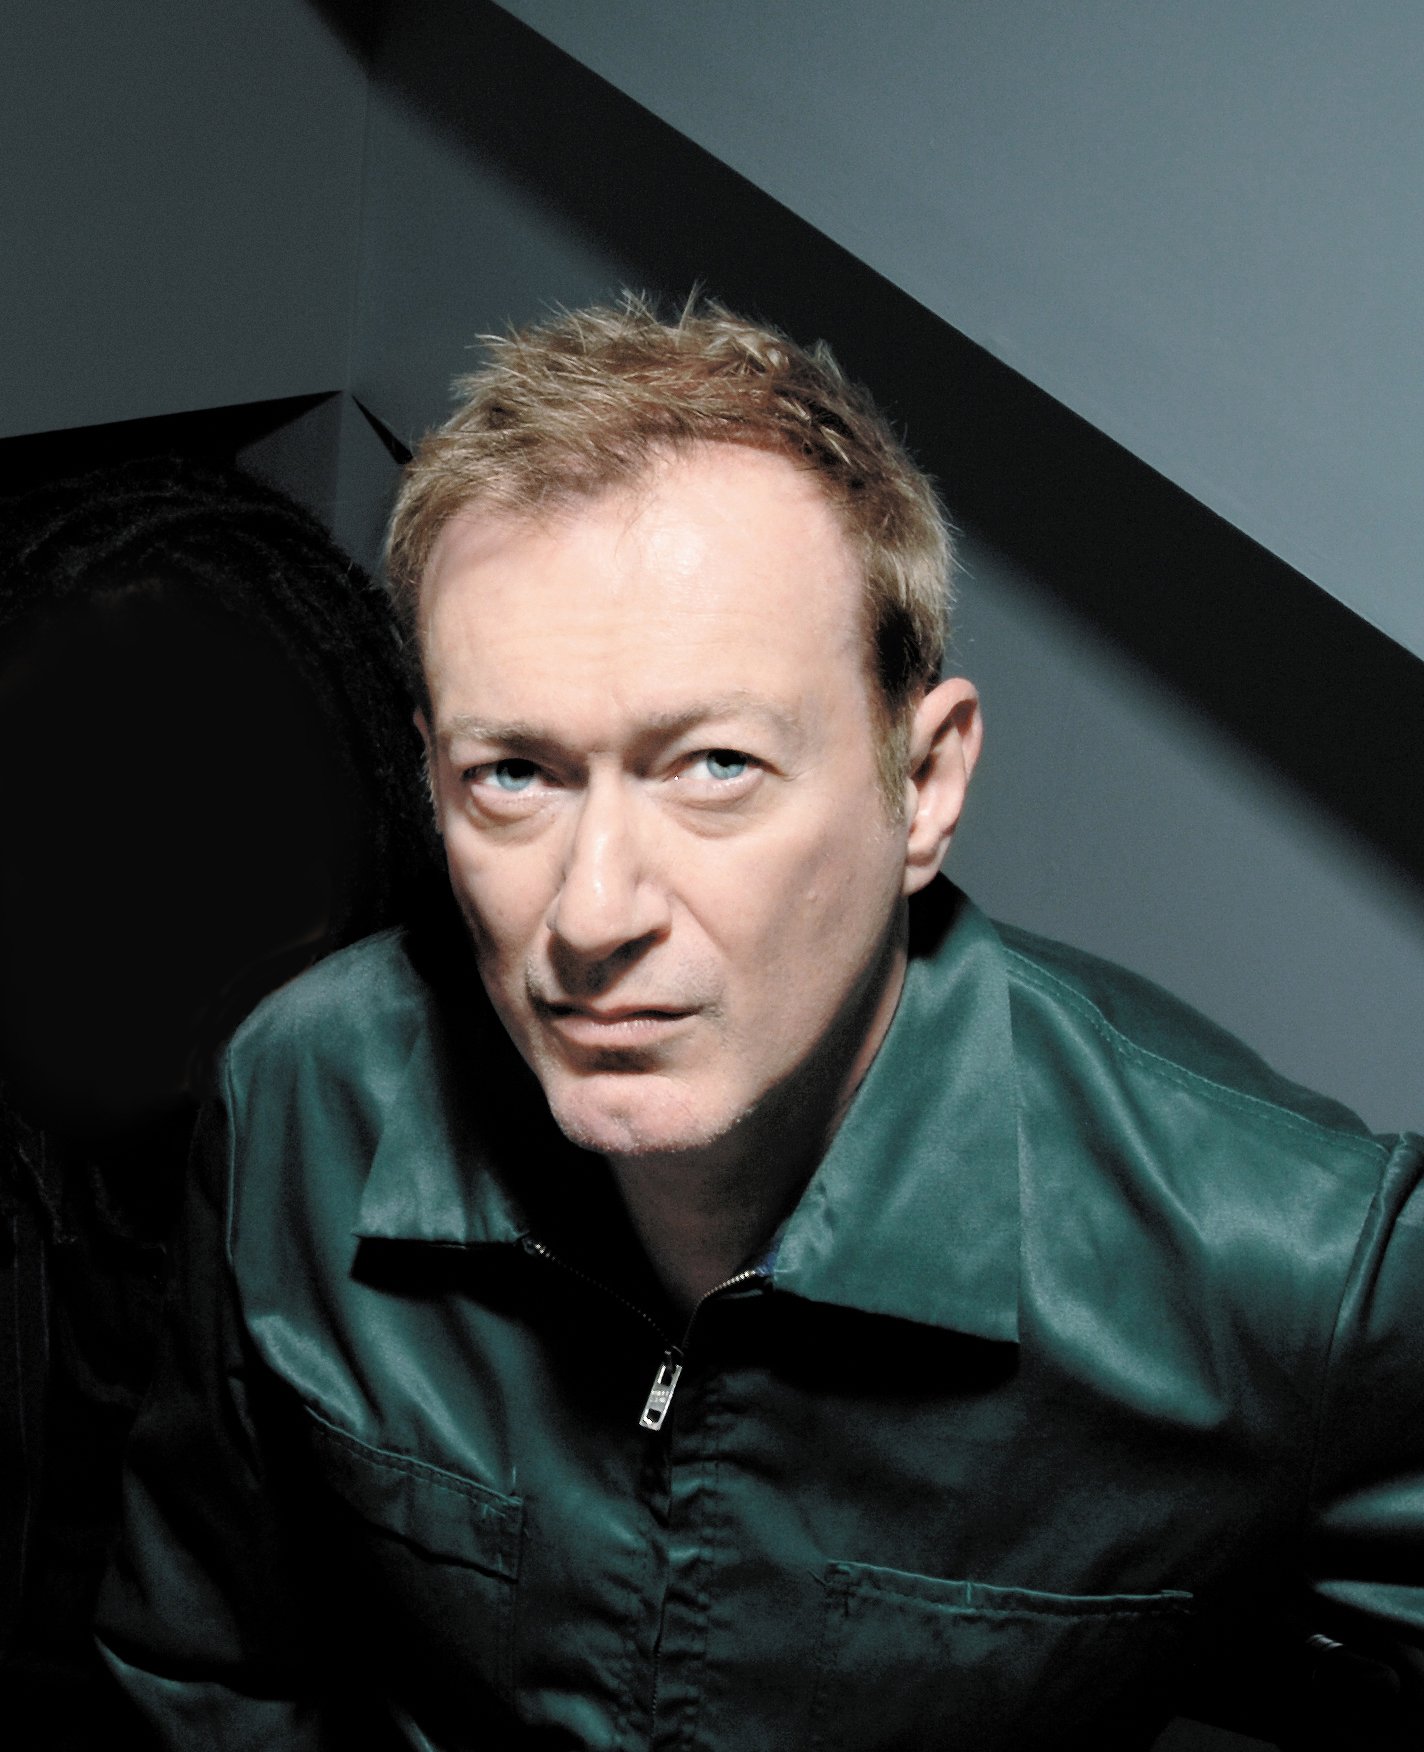 ANDY GILL pioneering guitar player & founding member of GANG OF FOUR, passed away at age 64 